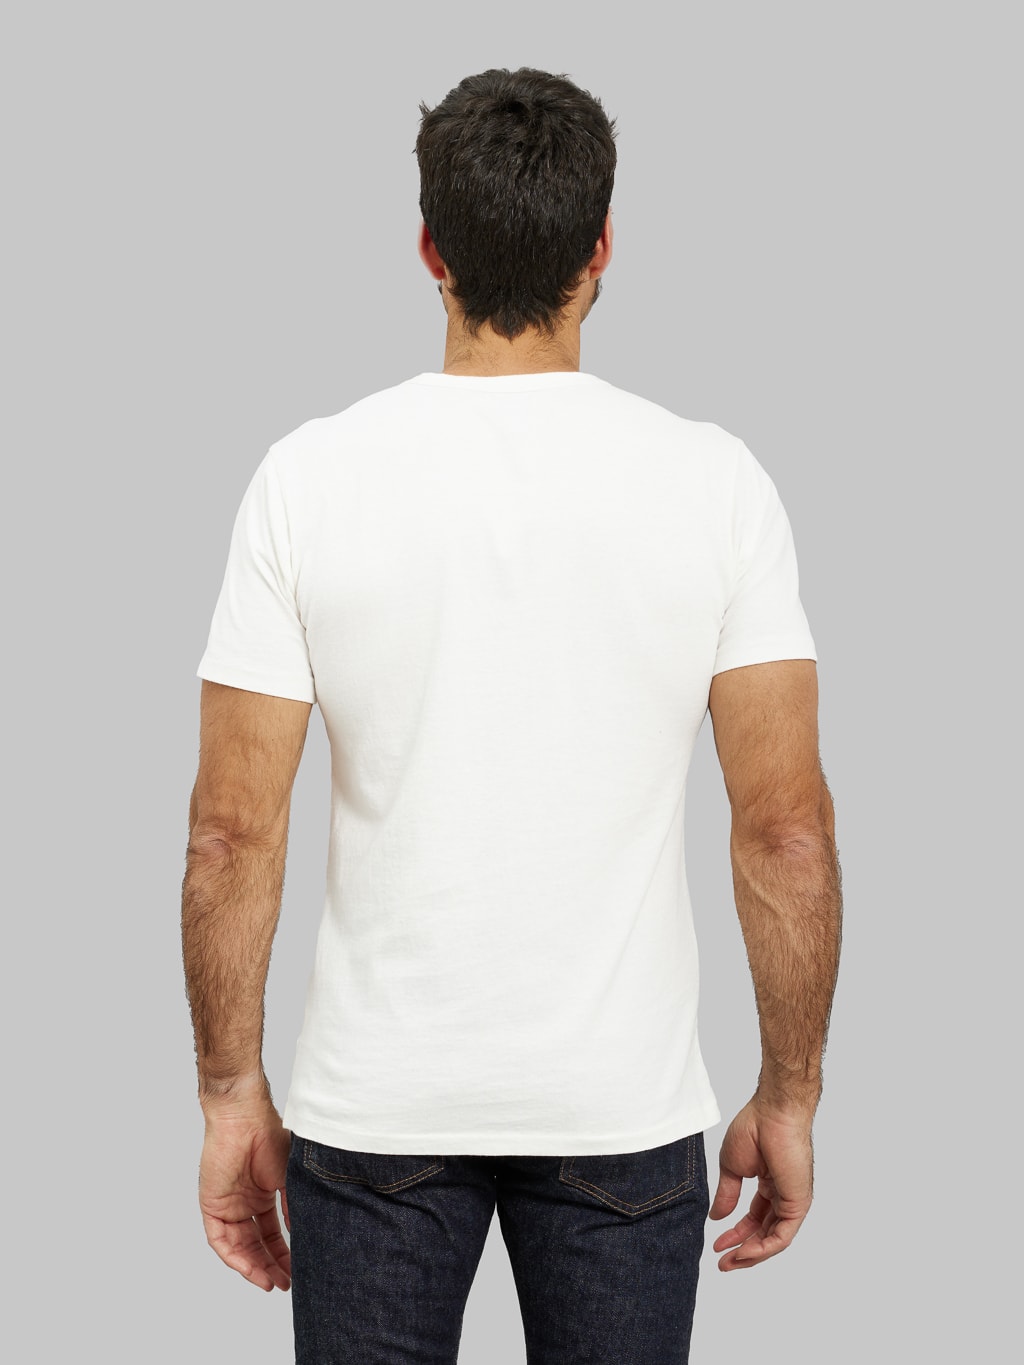 freenote-cloth-9-ounce-pocket-t-shirt-white-fit model back lookfreenote cloth 9 ounce pocket t shirt white model back look